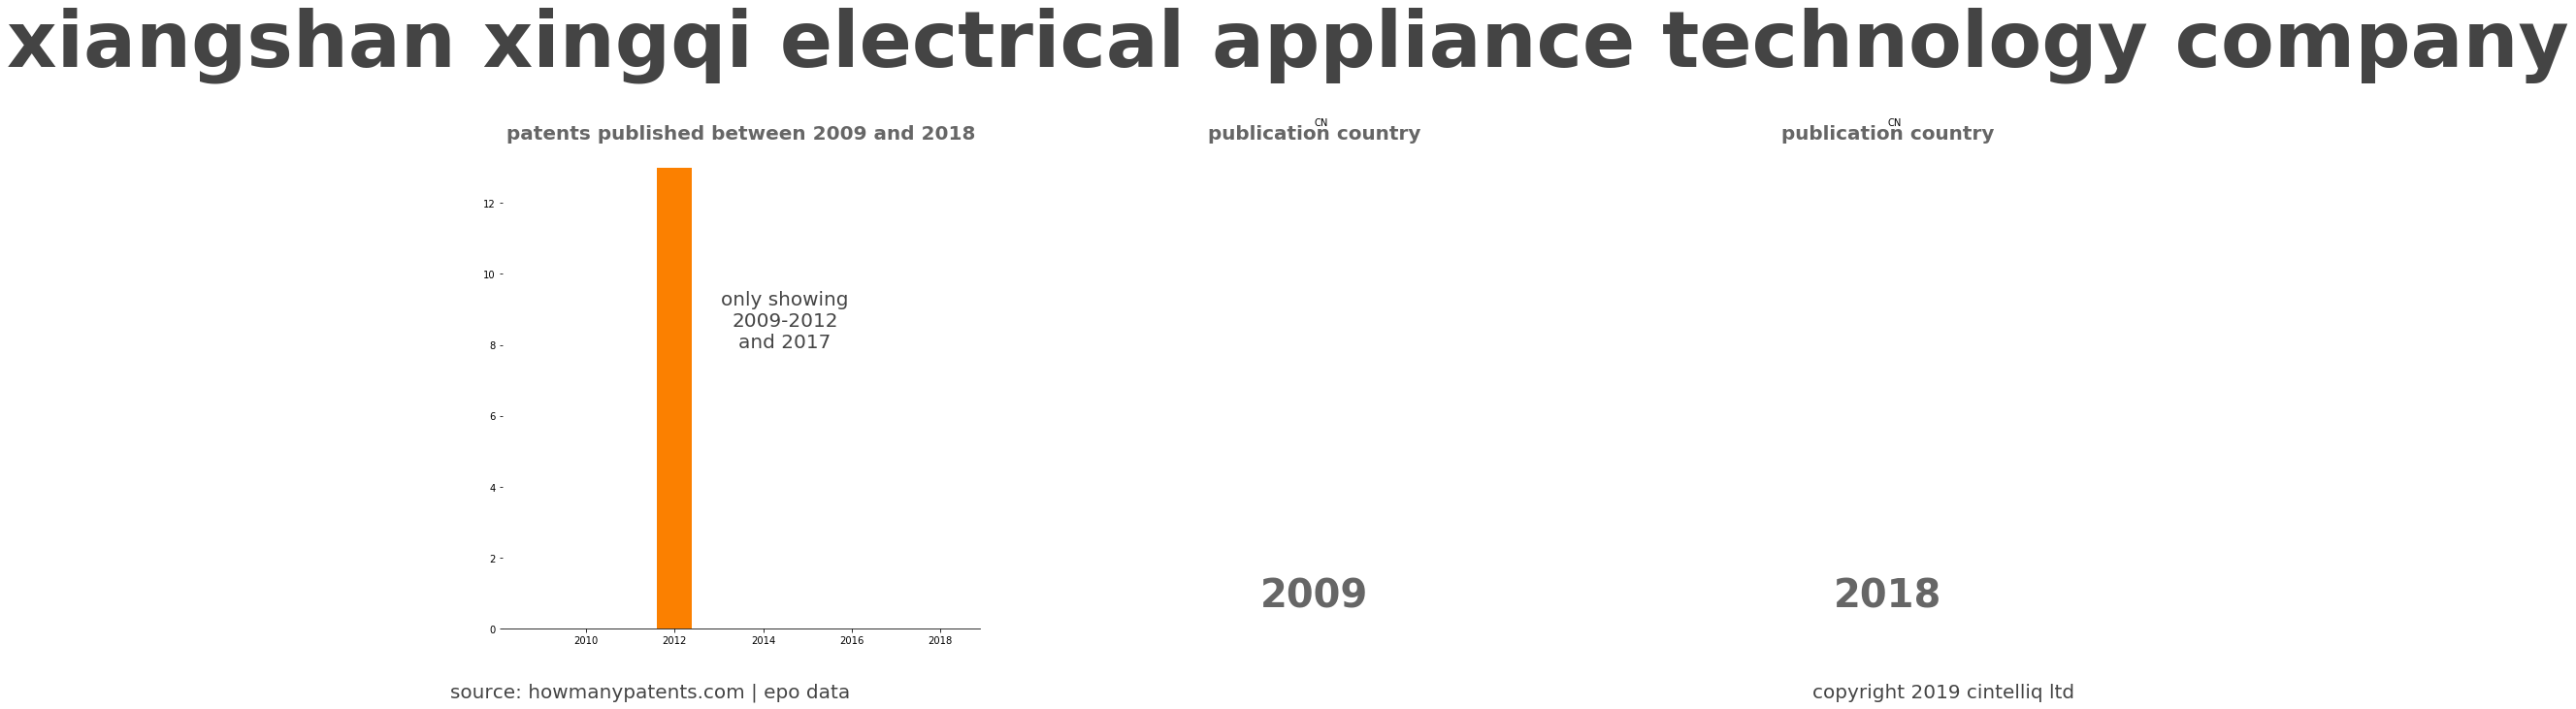 summary of patents for Xiangshan Xingqi Electrical Appliance Technology Company